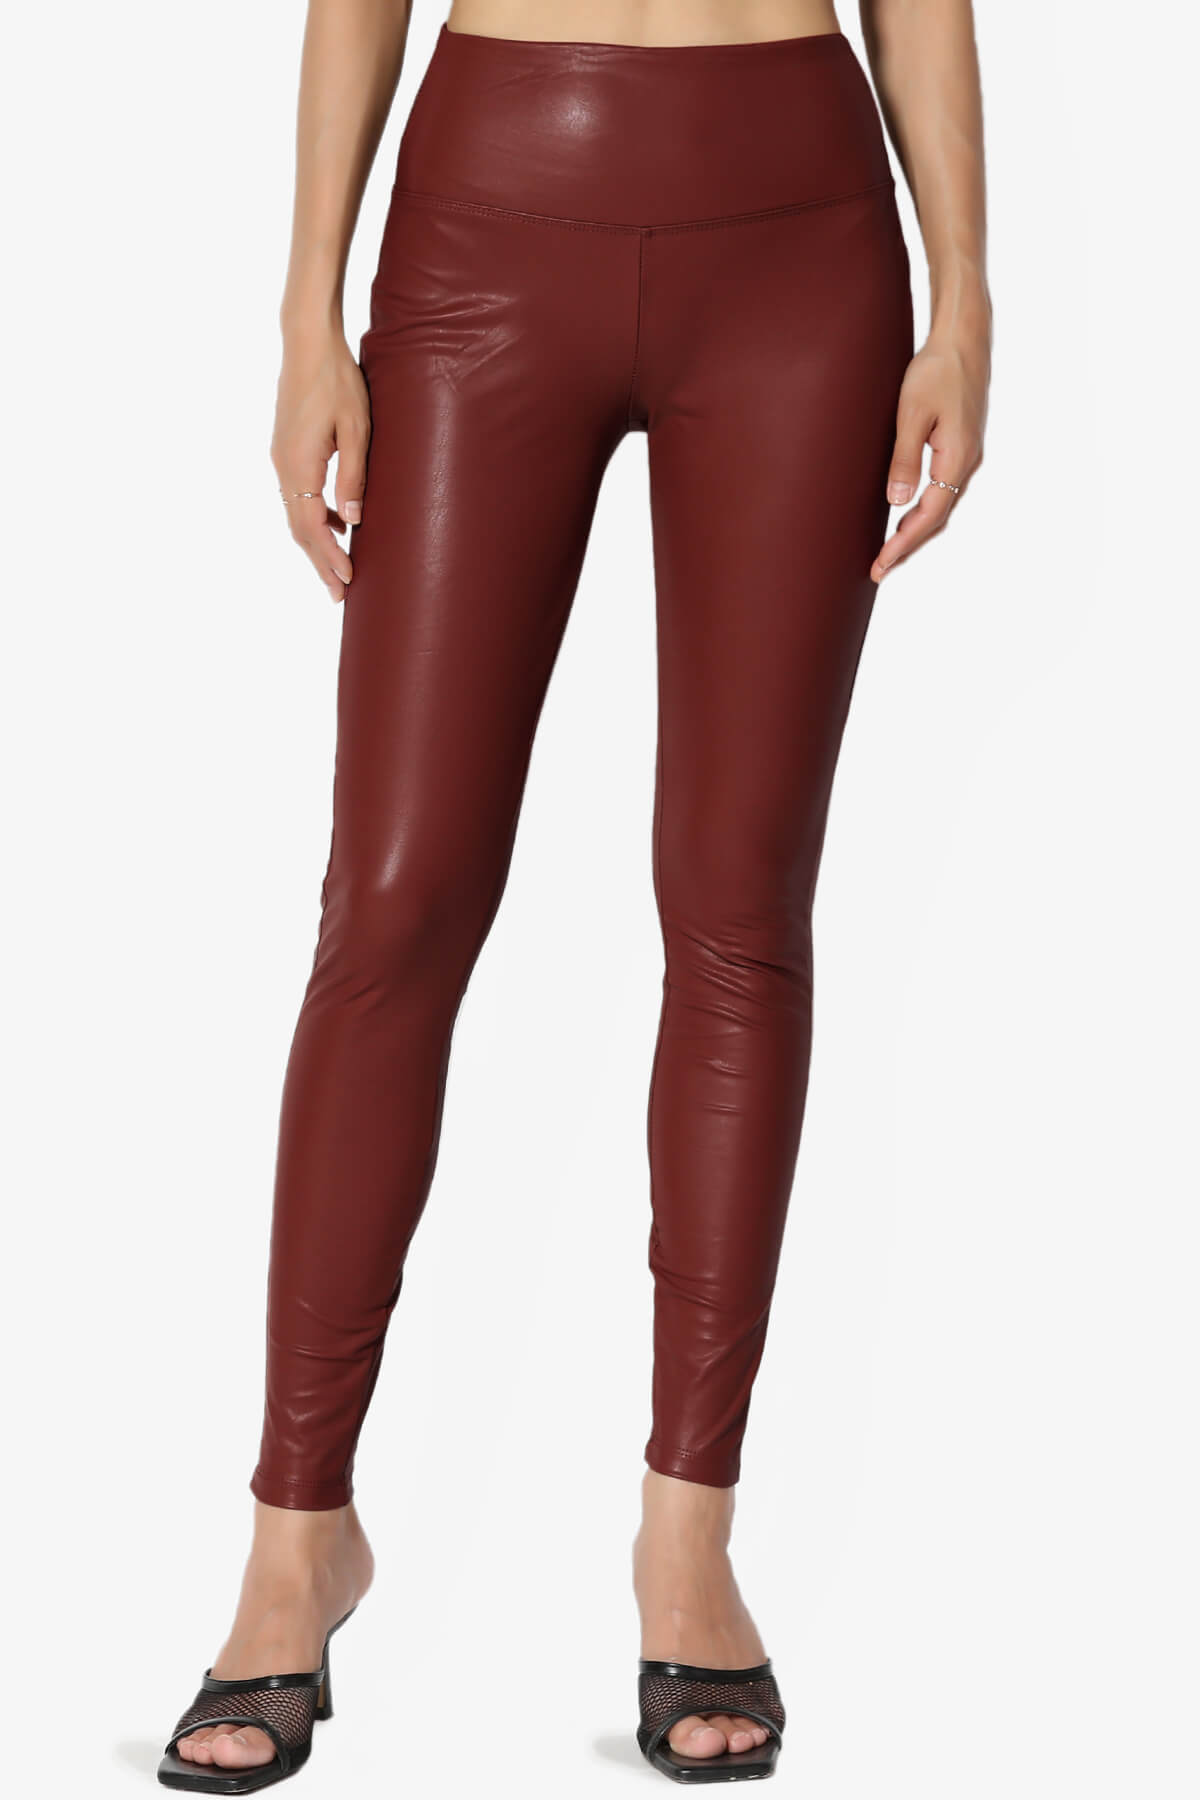 Zenana Outfitters Women's Faux Leather High Rise Ankle Leggings